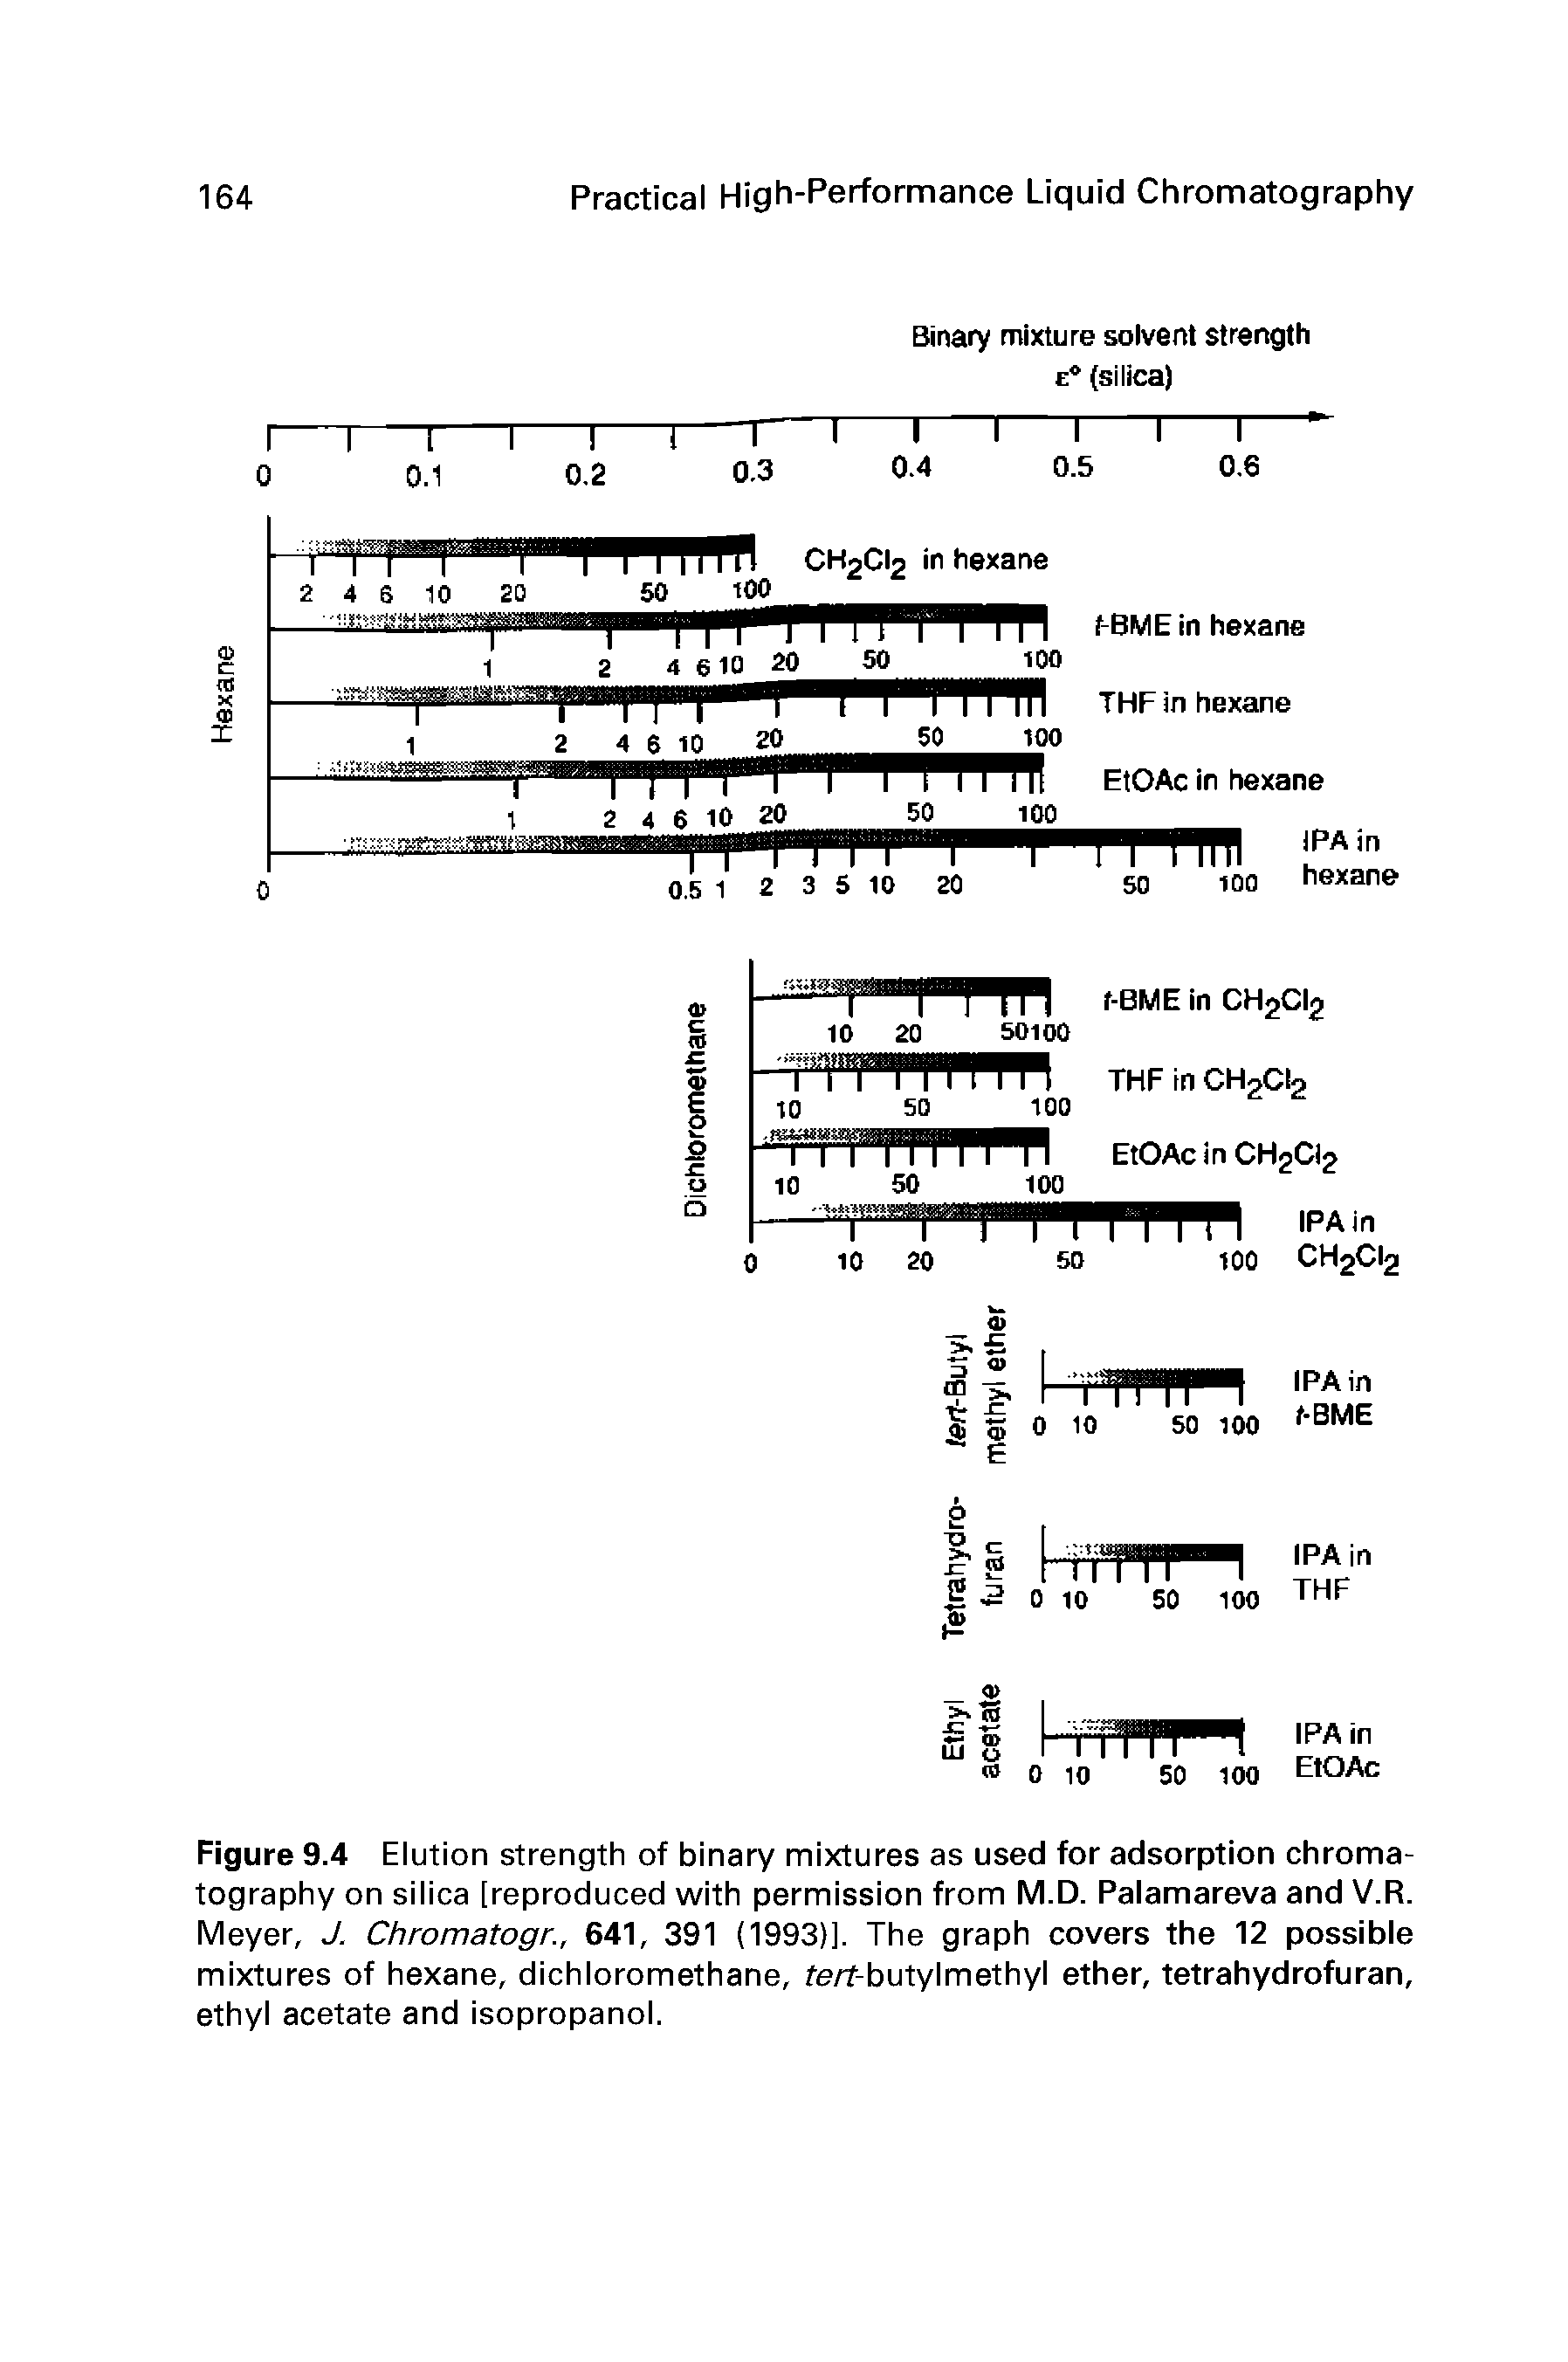 Figure 9.4 Elution strength of binary mixtures as used for adsorption chromatography on silica [reproduced with permission from M.D. Palamareva and V.R. Meyer, J. Chromatogr., 641, 391 (1993)]. The graph covers the 12 possible mixtures of hexane, dichloromethane, te/T-butylmethyl ether, tetrahydrofuran, ethyl acetate and isopropanol.